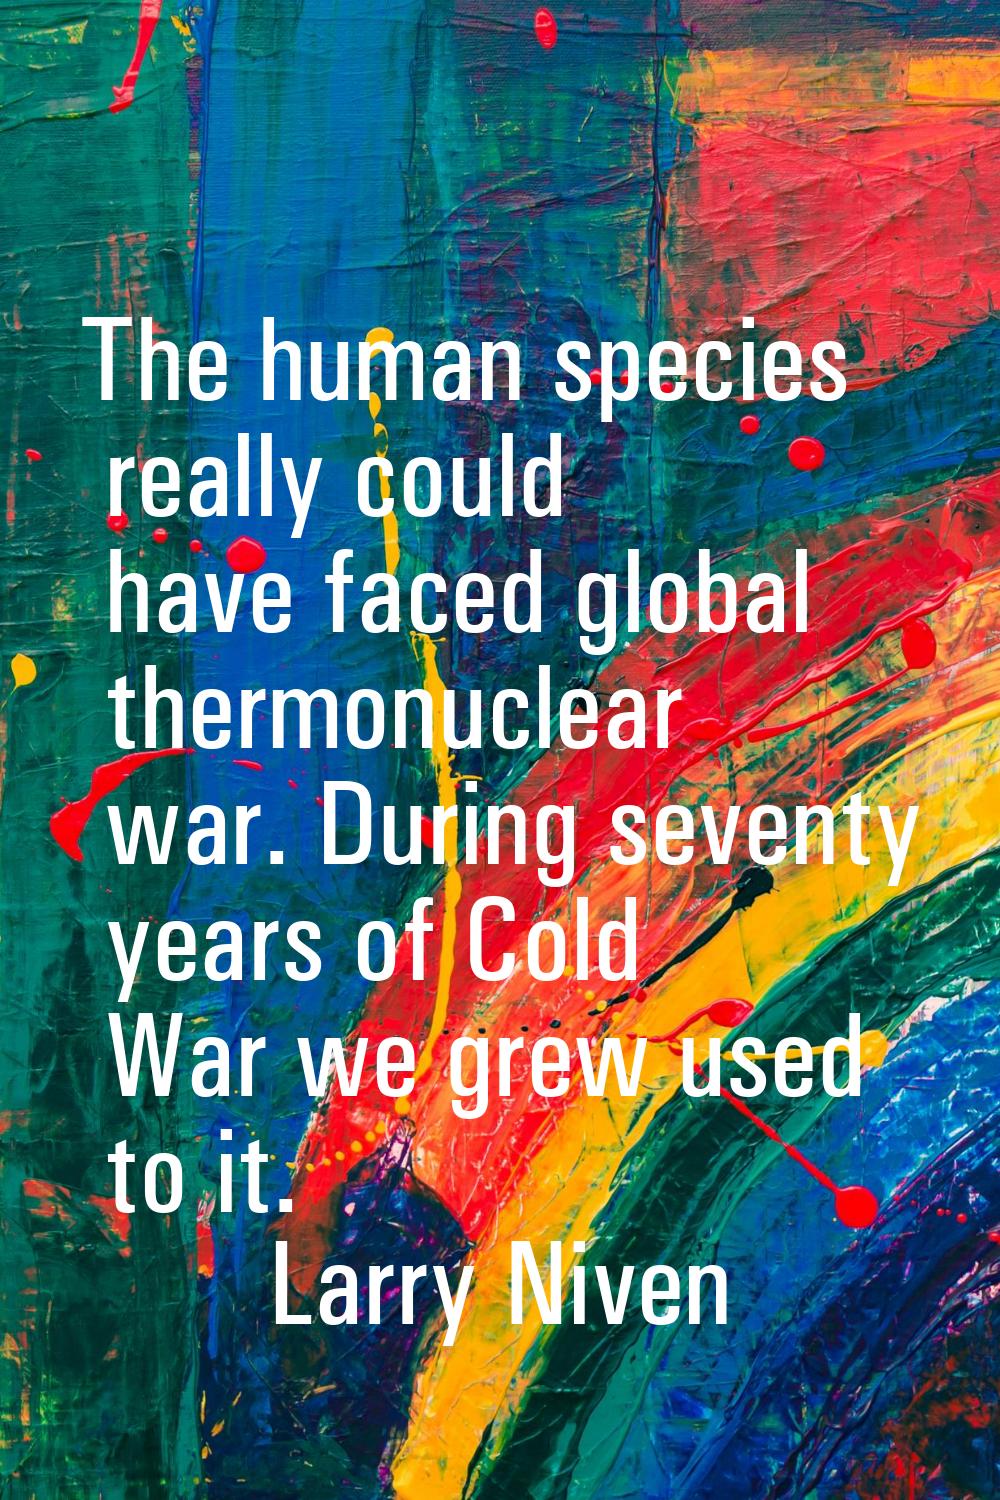 The human species really could have faced global thermonuclear war. During seventy years of Cold Wa